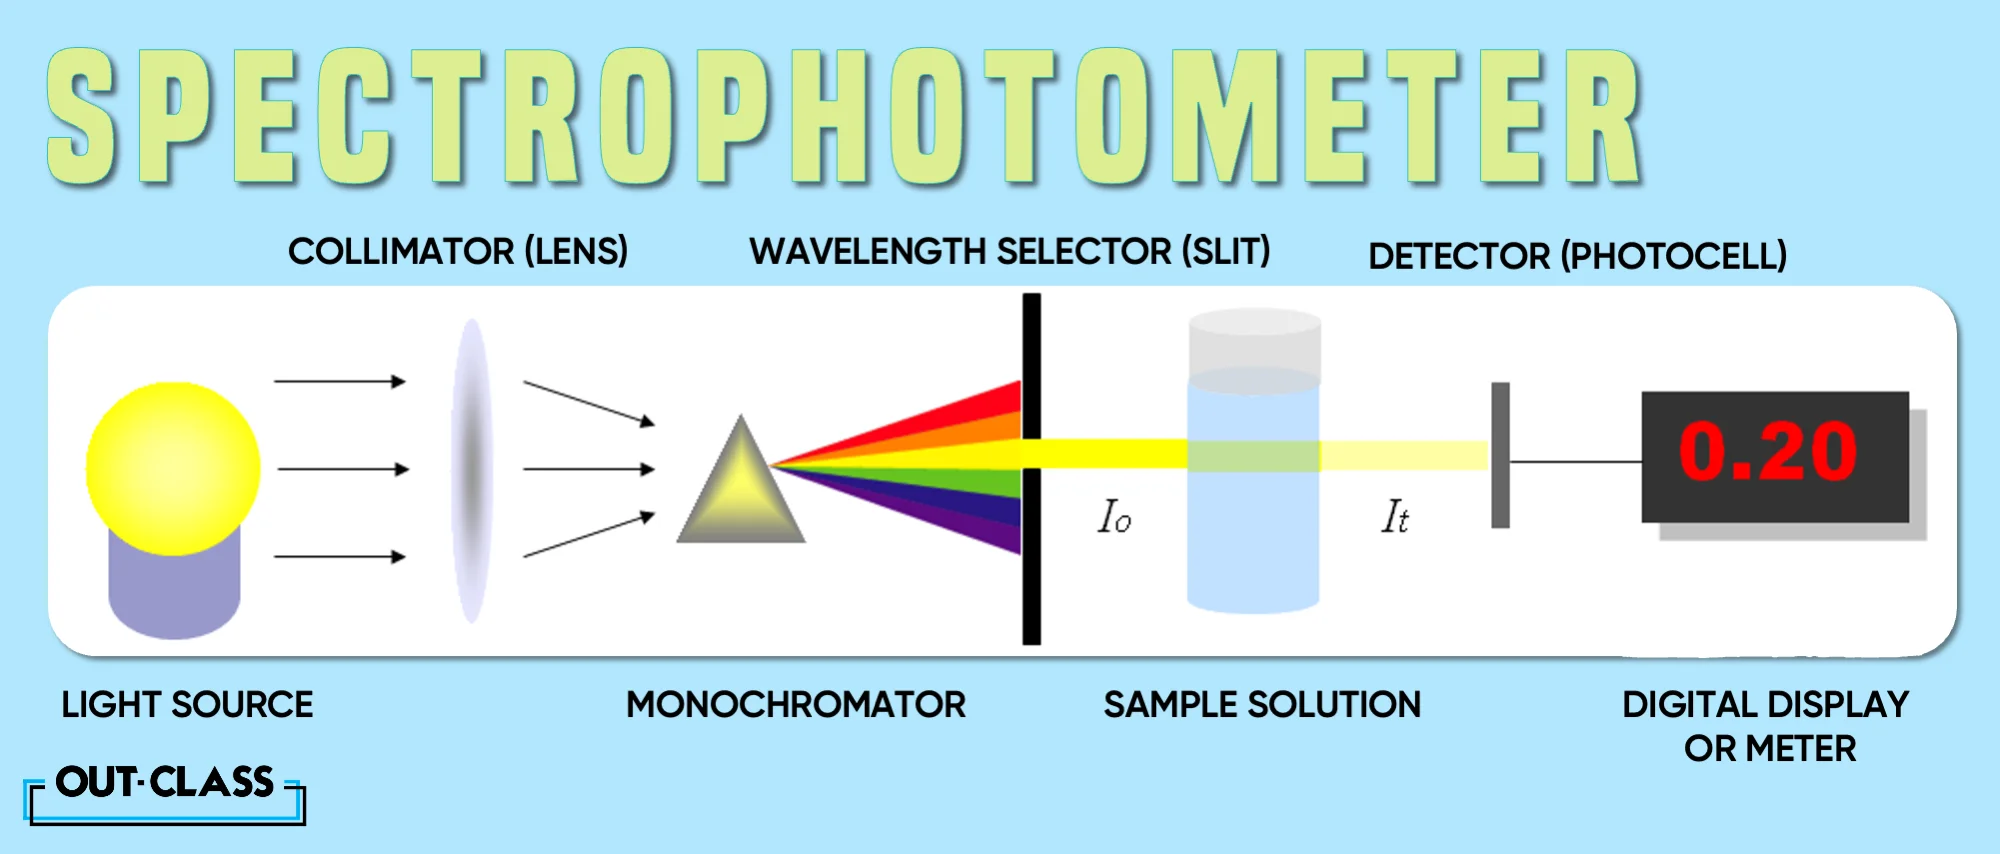 the image shows what the function of spectrophotometer is and what the main five parts are. it illustrates the types and purpose of a spectrophotometer in various subjects such as chemistry, biology and environmental sciences. this is helpful in the entry test study guides as it is a common topic that occurs.